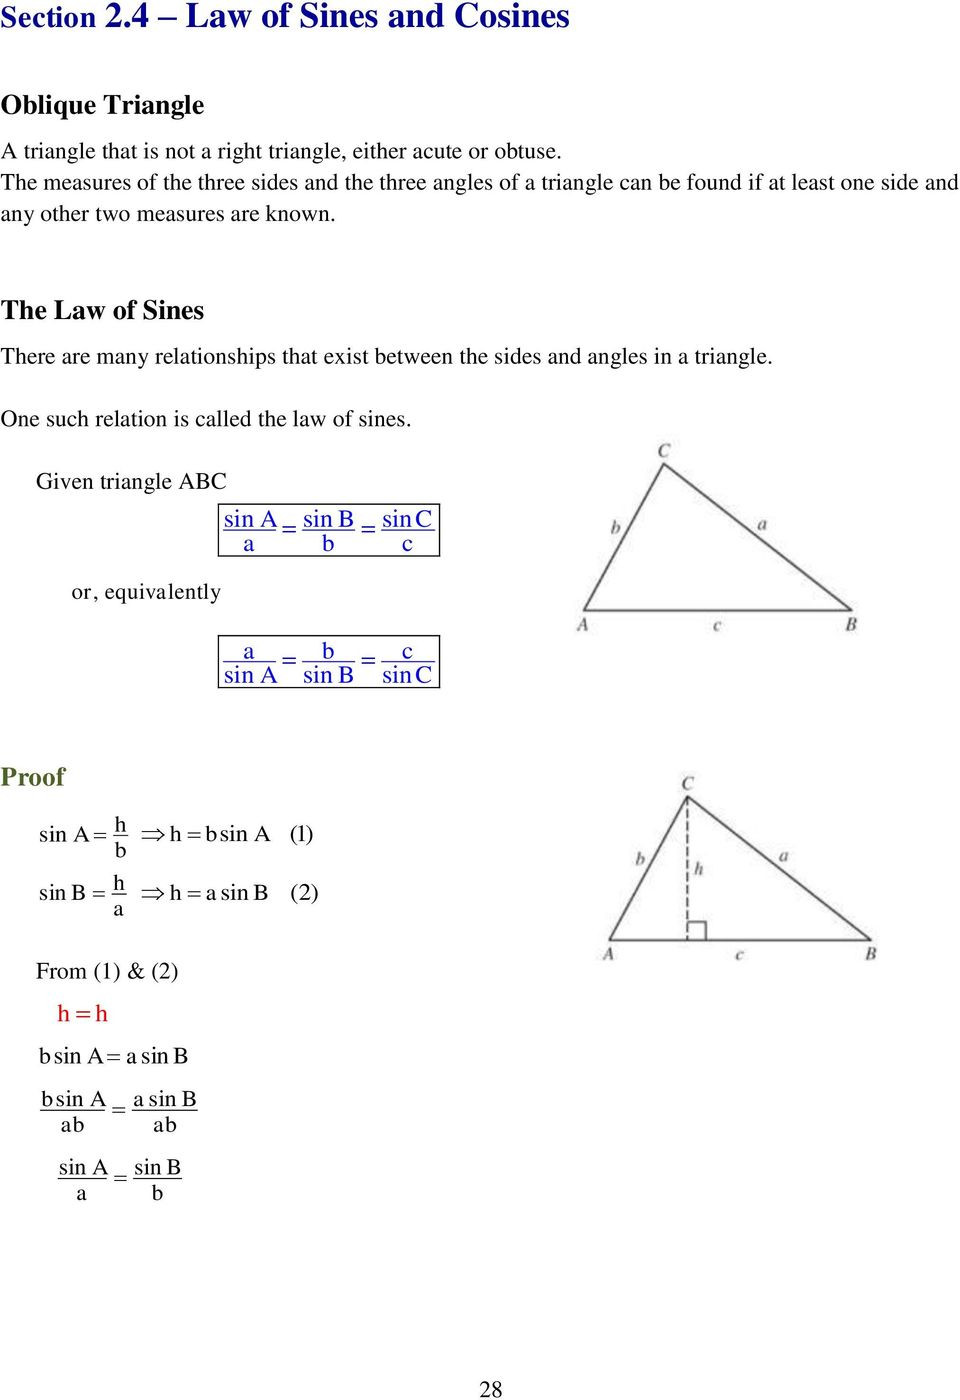 Law Of Sines Worksheet Section 2 4 Law Of Sines and Cosines Pdf Free Download